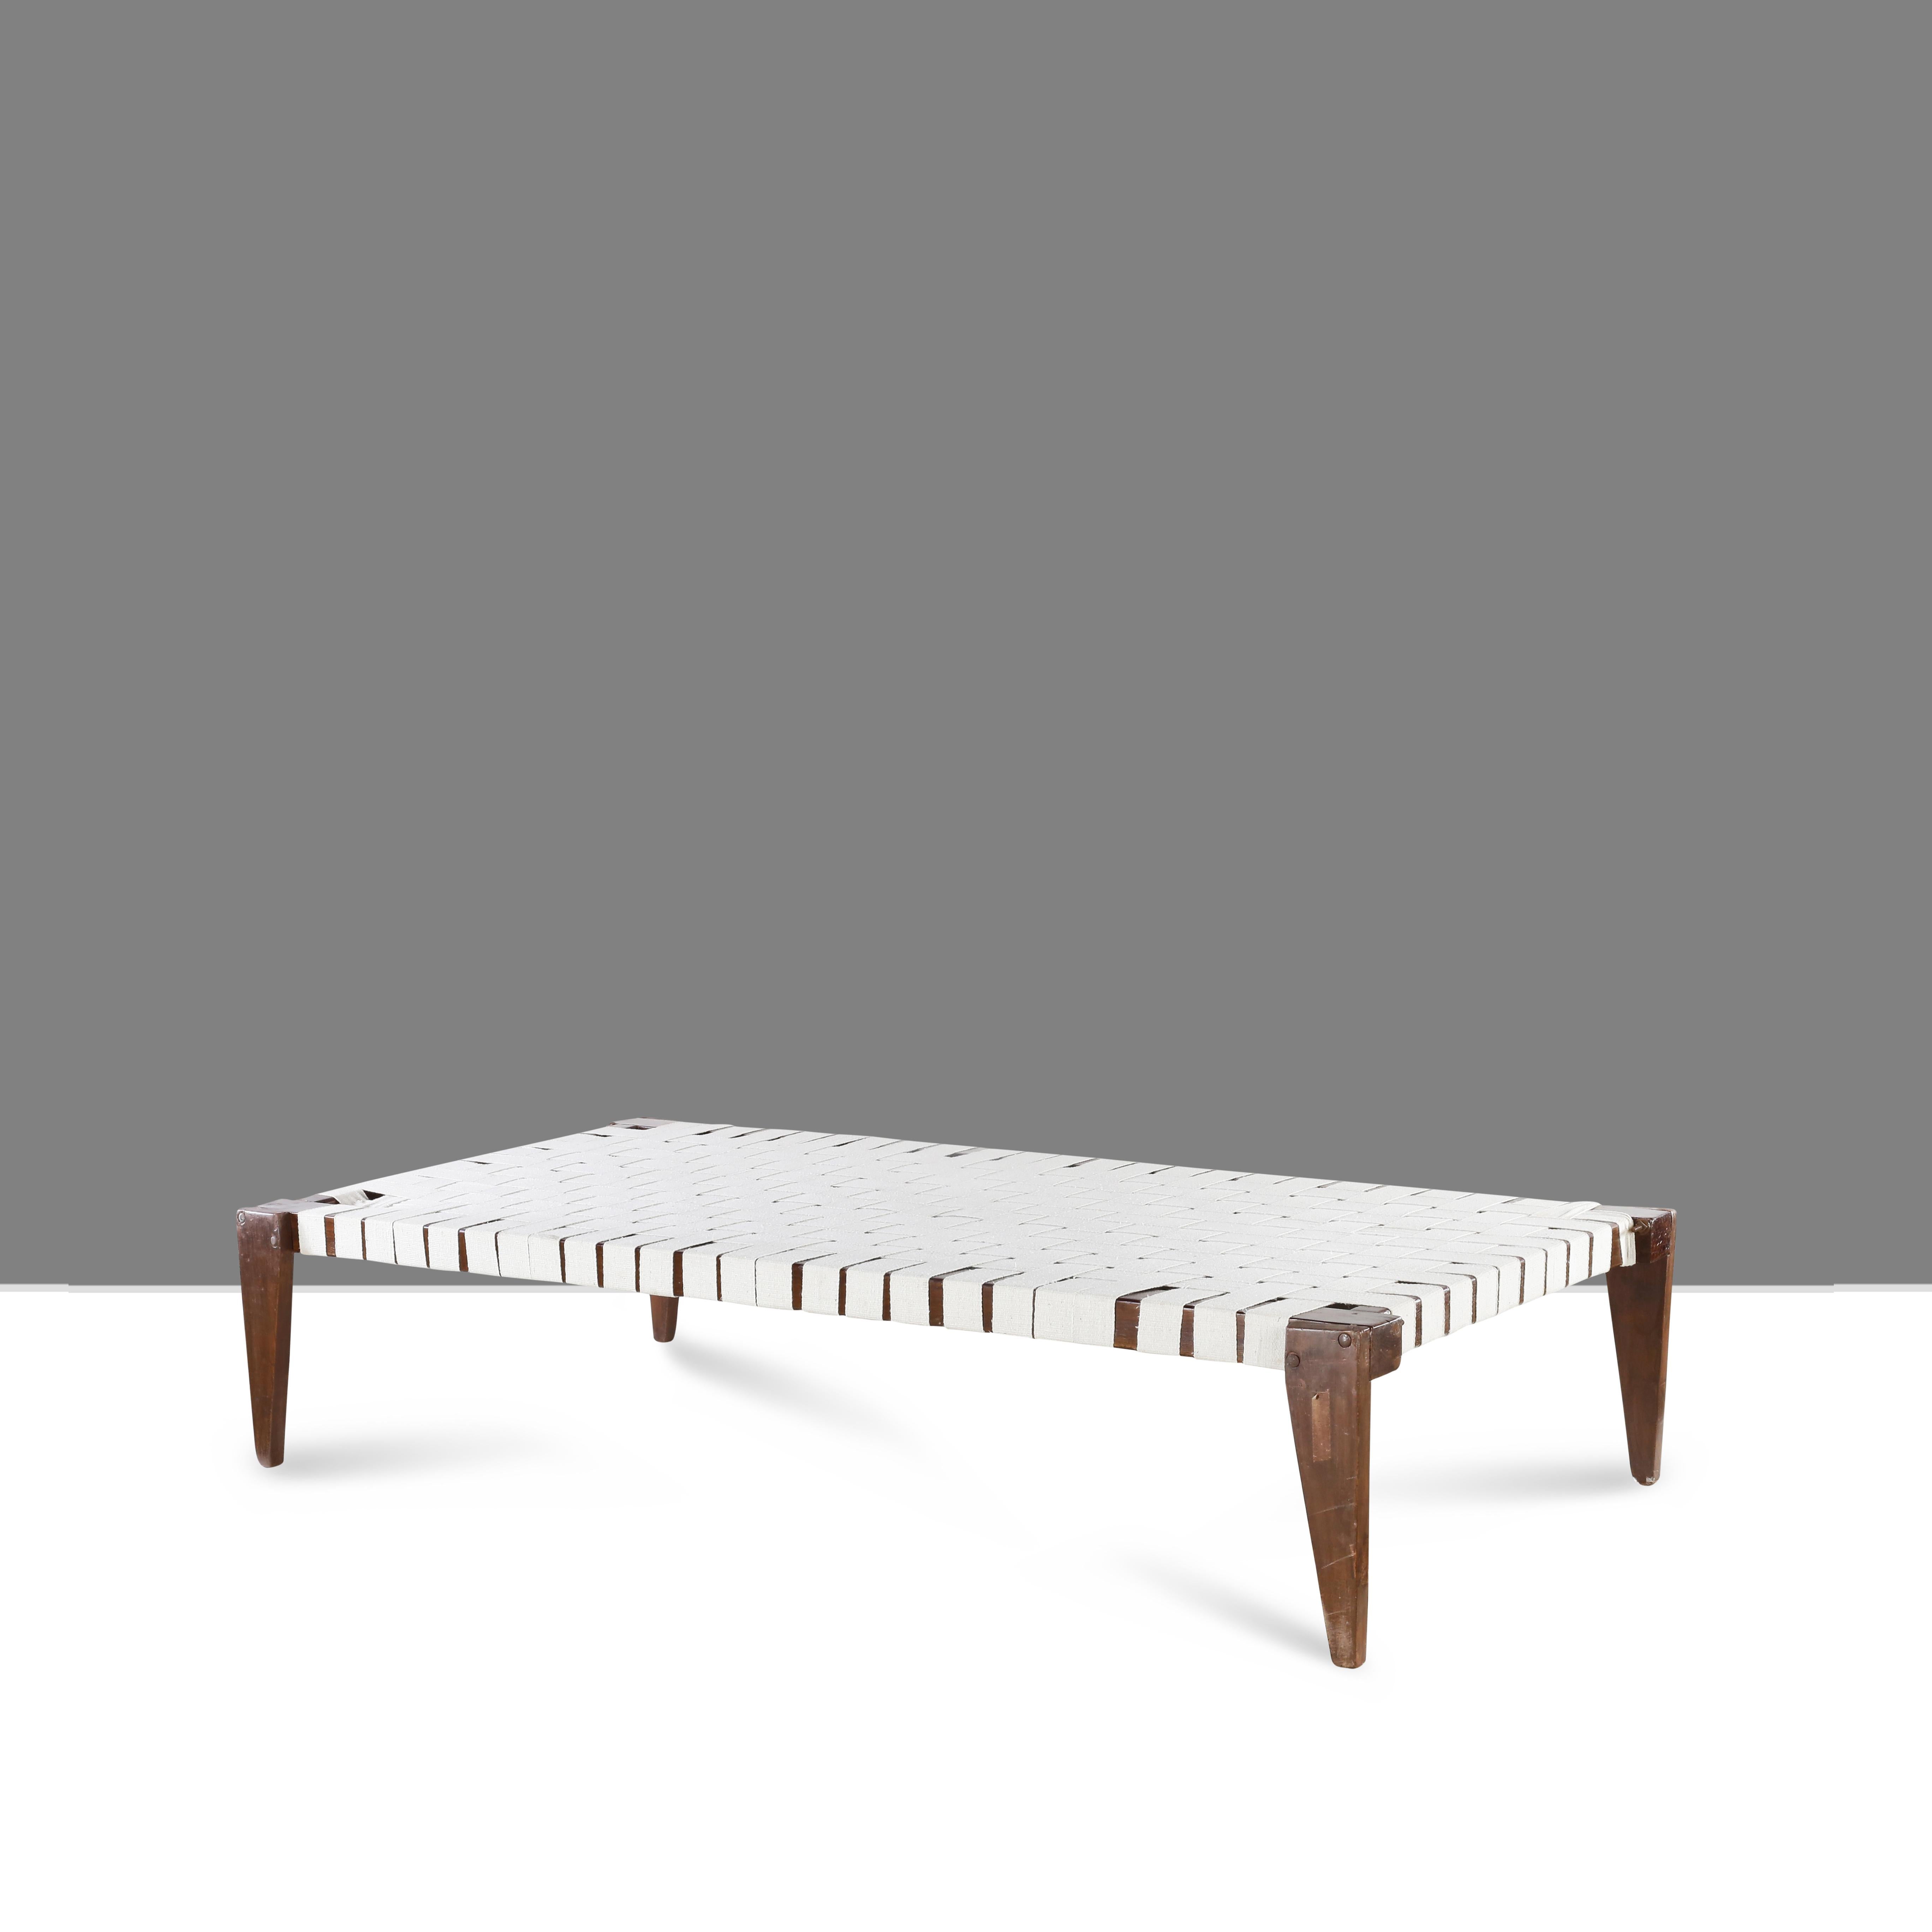 20th Century Piere Jeanneret PJ-L-05-A Single Bed / Authentic Mid-Century Modern For Sale